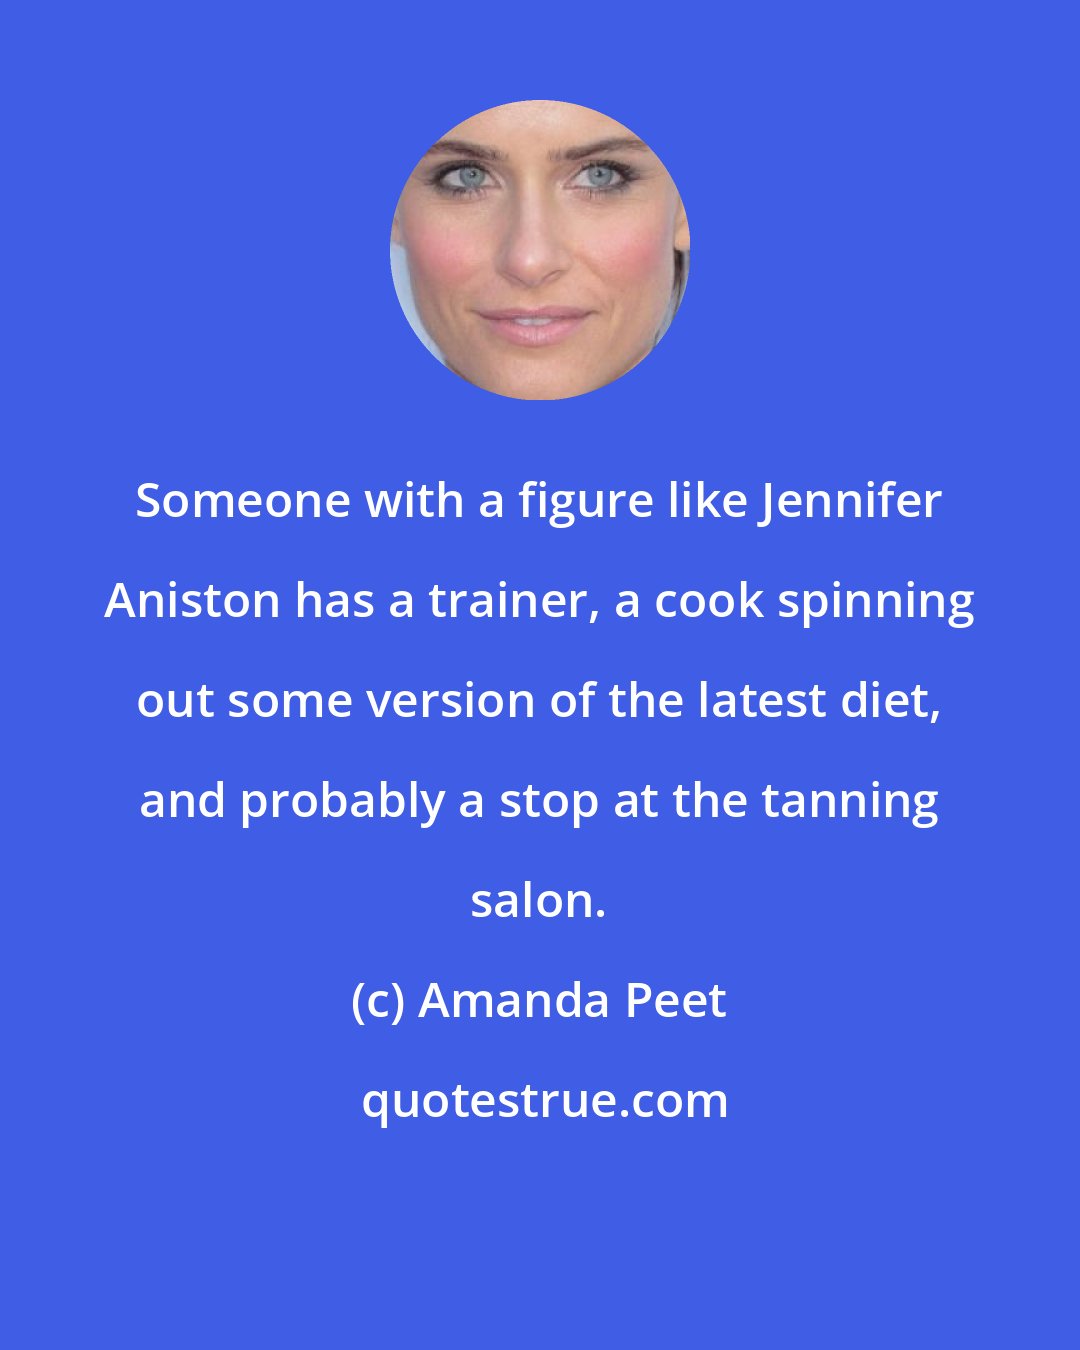 Amanda Peet: Someone with a figure like Jennifer Aniston has a trainer, a cook spinning out some version of the latest diet, and probably a stop at the tanning salon.